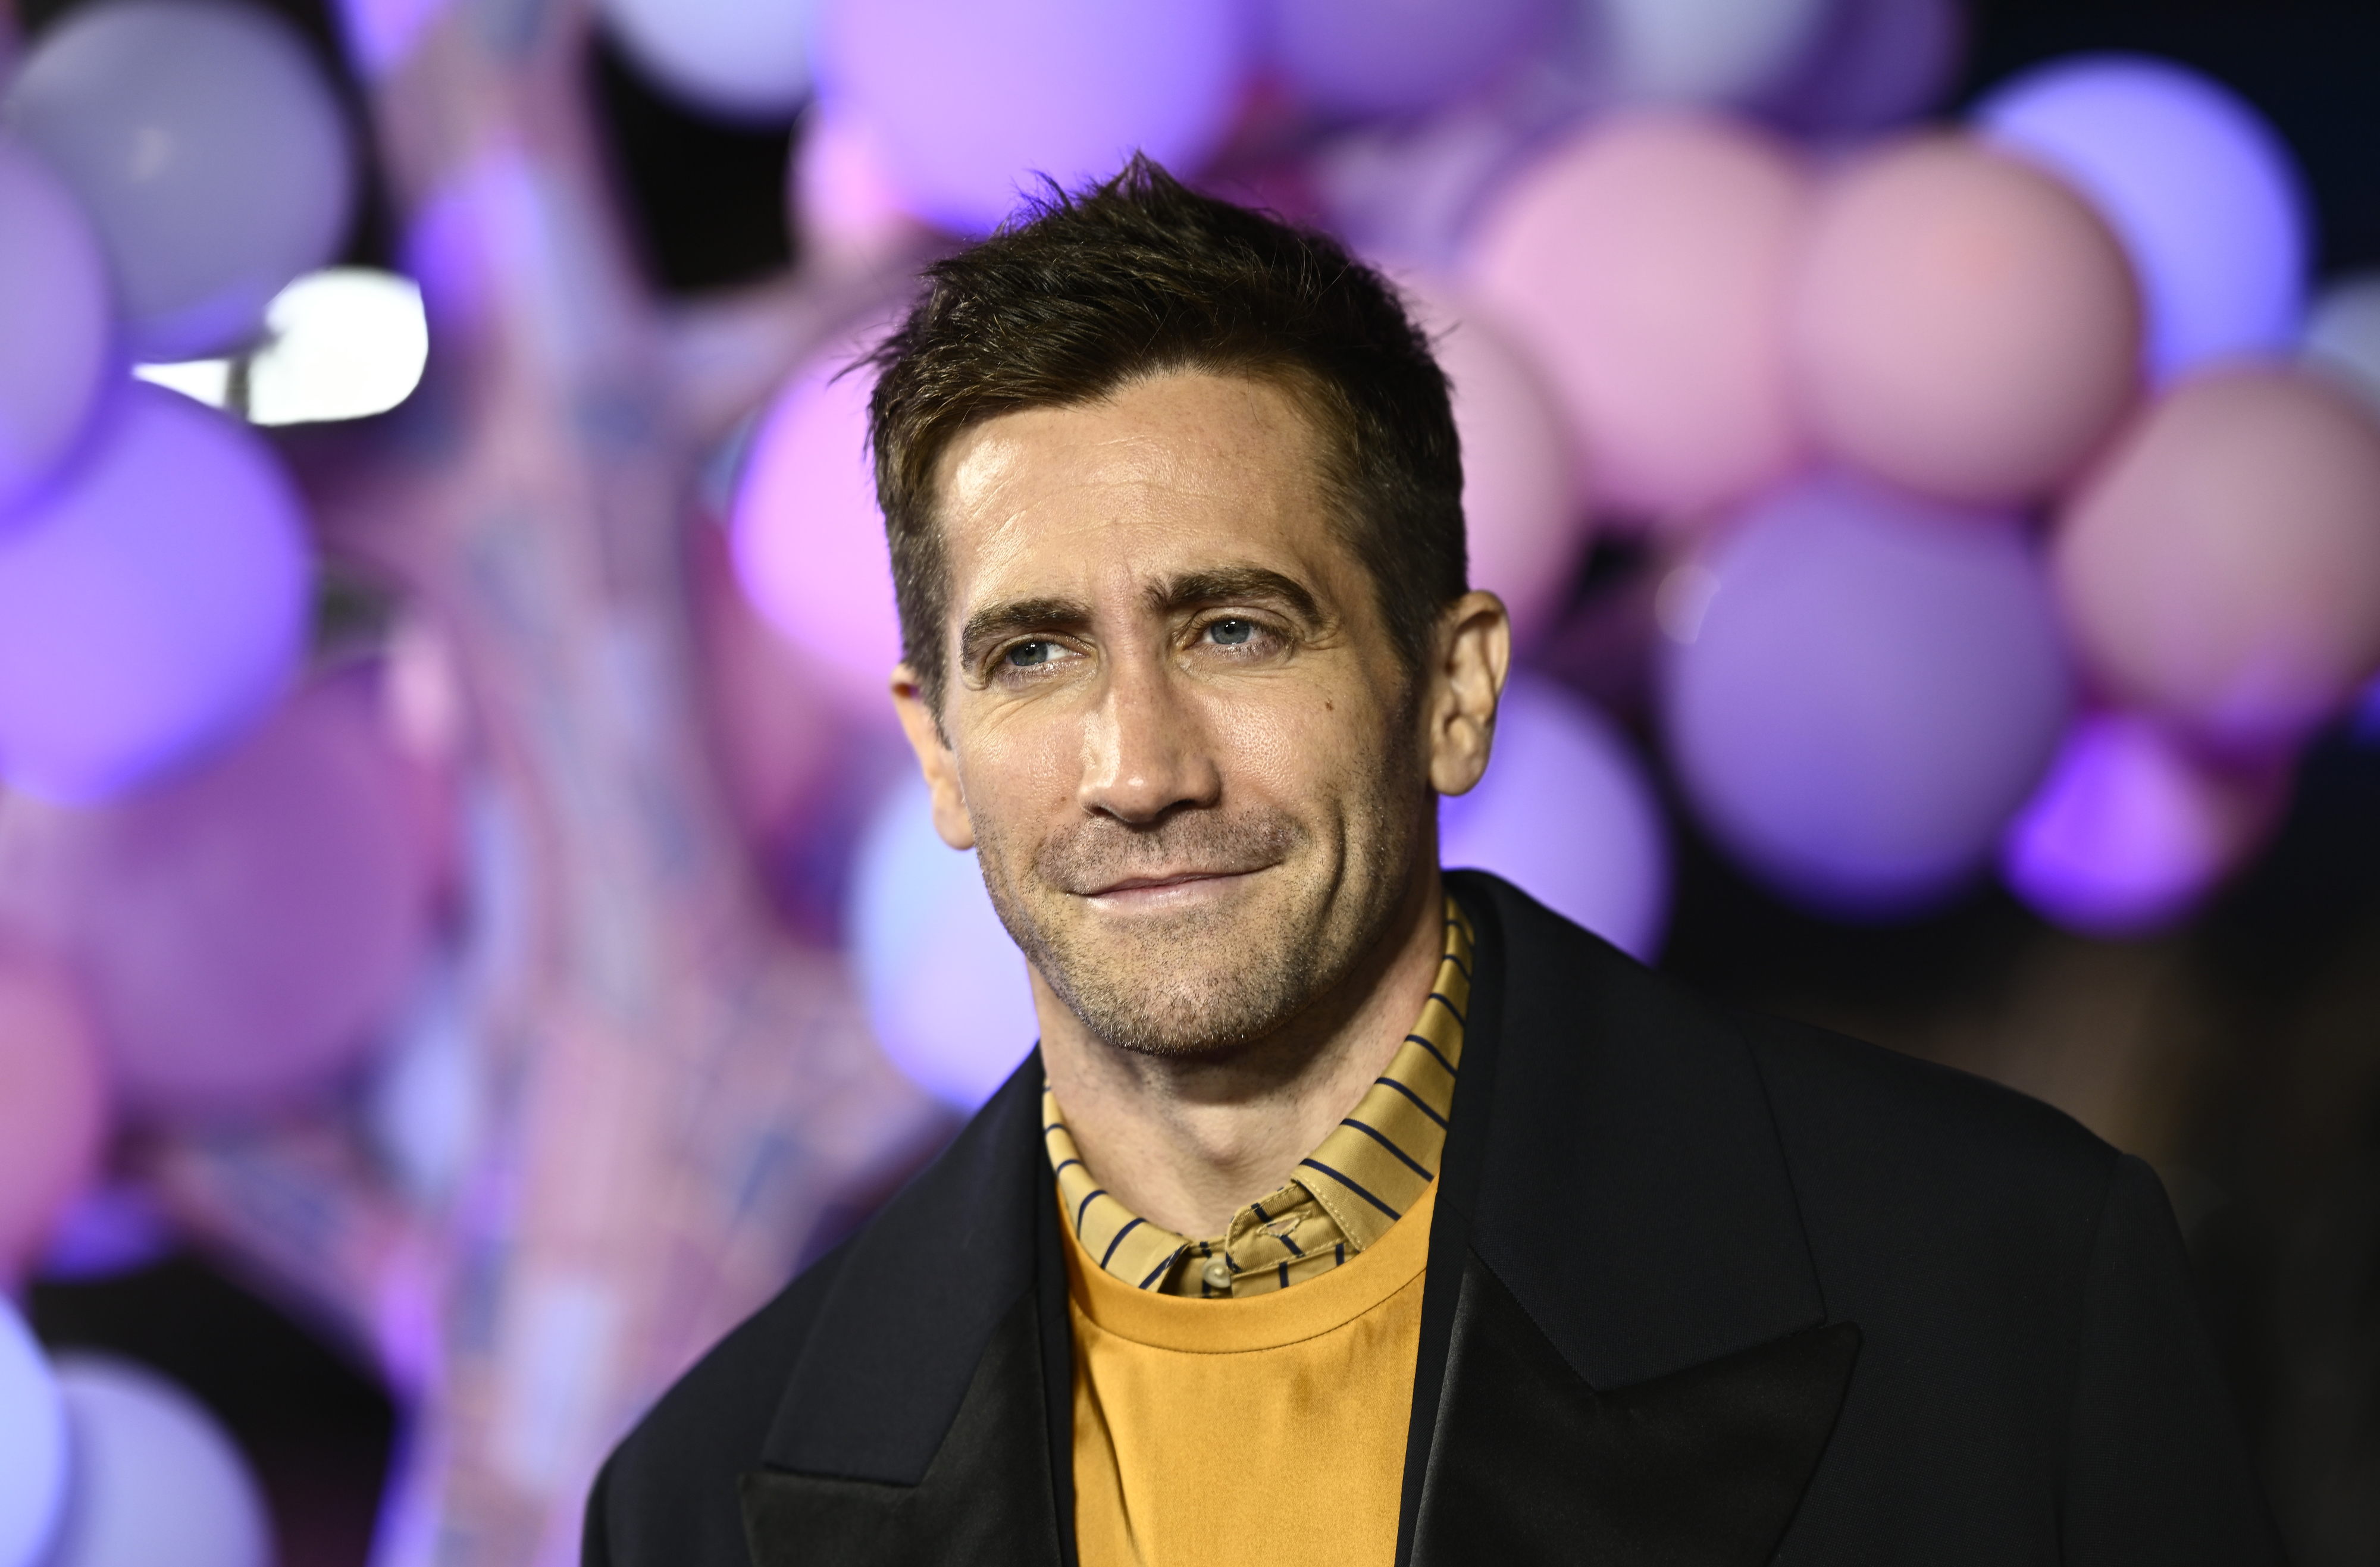 Jake Gyllenhaal in a shirt and jacket, smiling at a premiere with balloons in the background